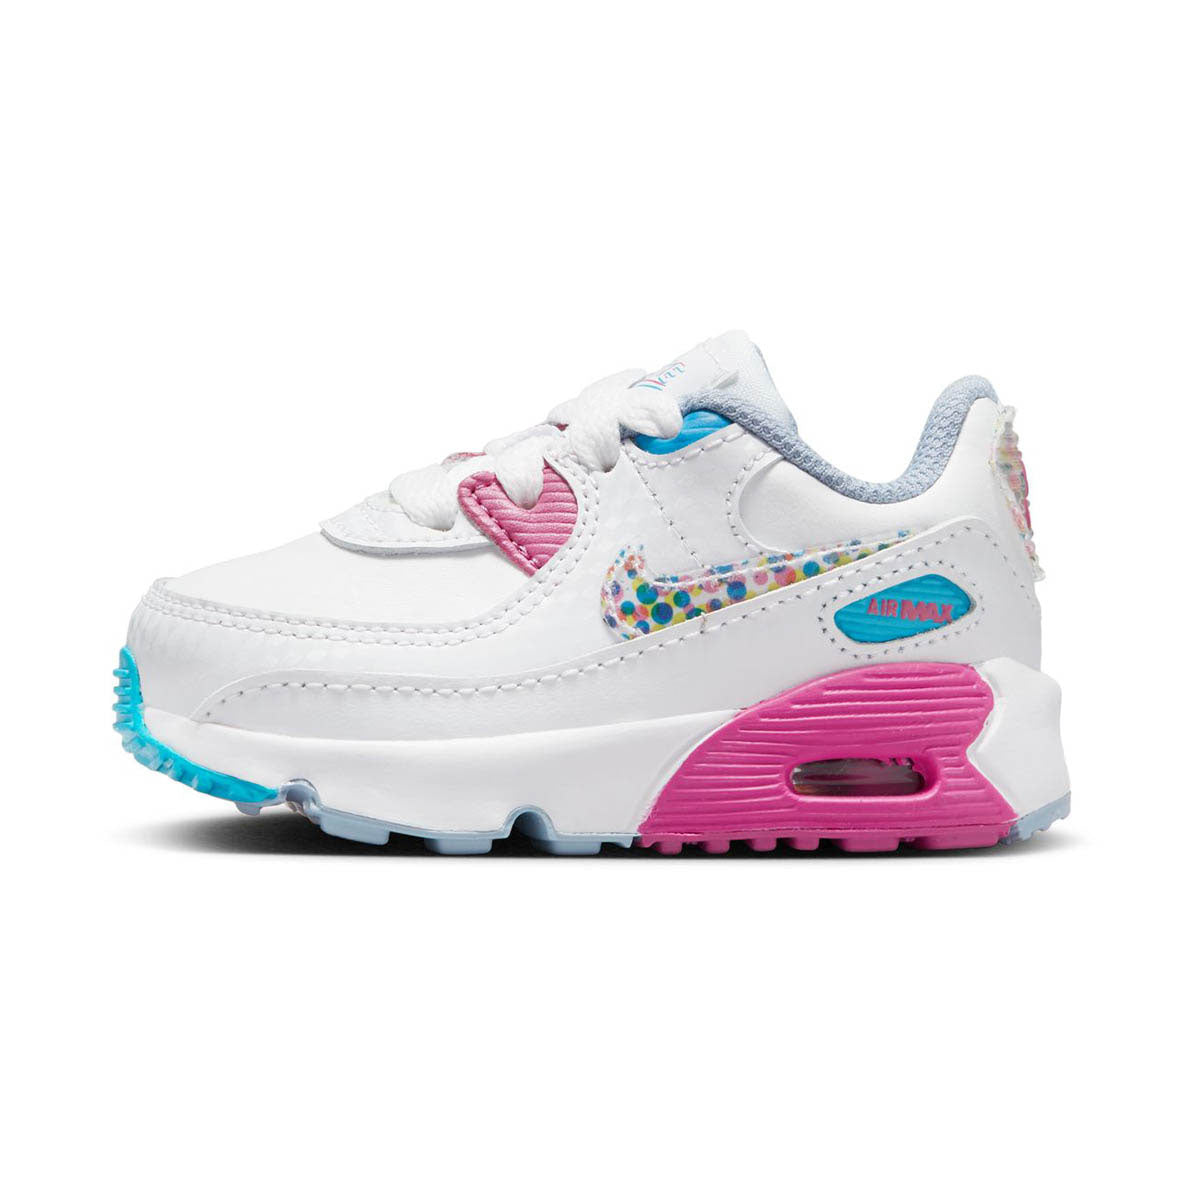 ui milieu oosters Nike Air Max 90 LTR SE Baby/Toddler Shoes - Millennium Shoes